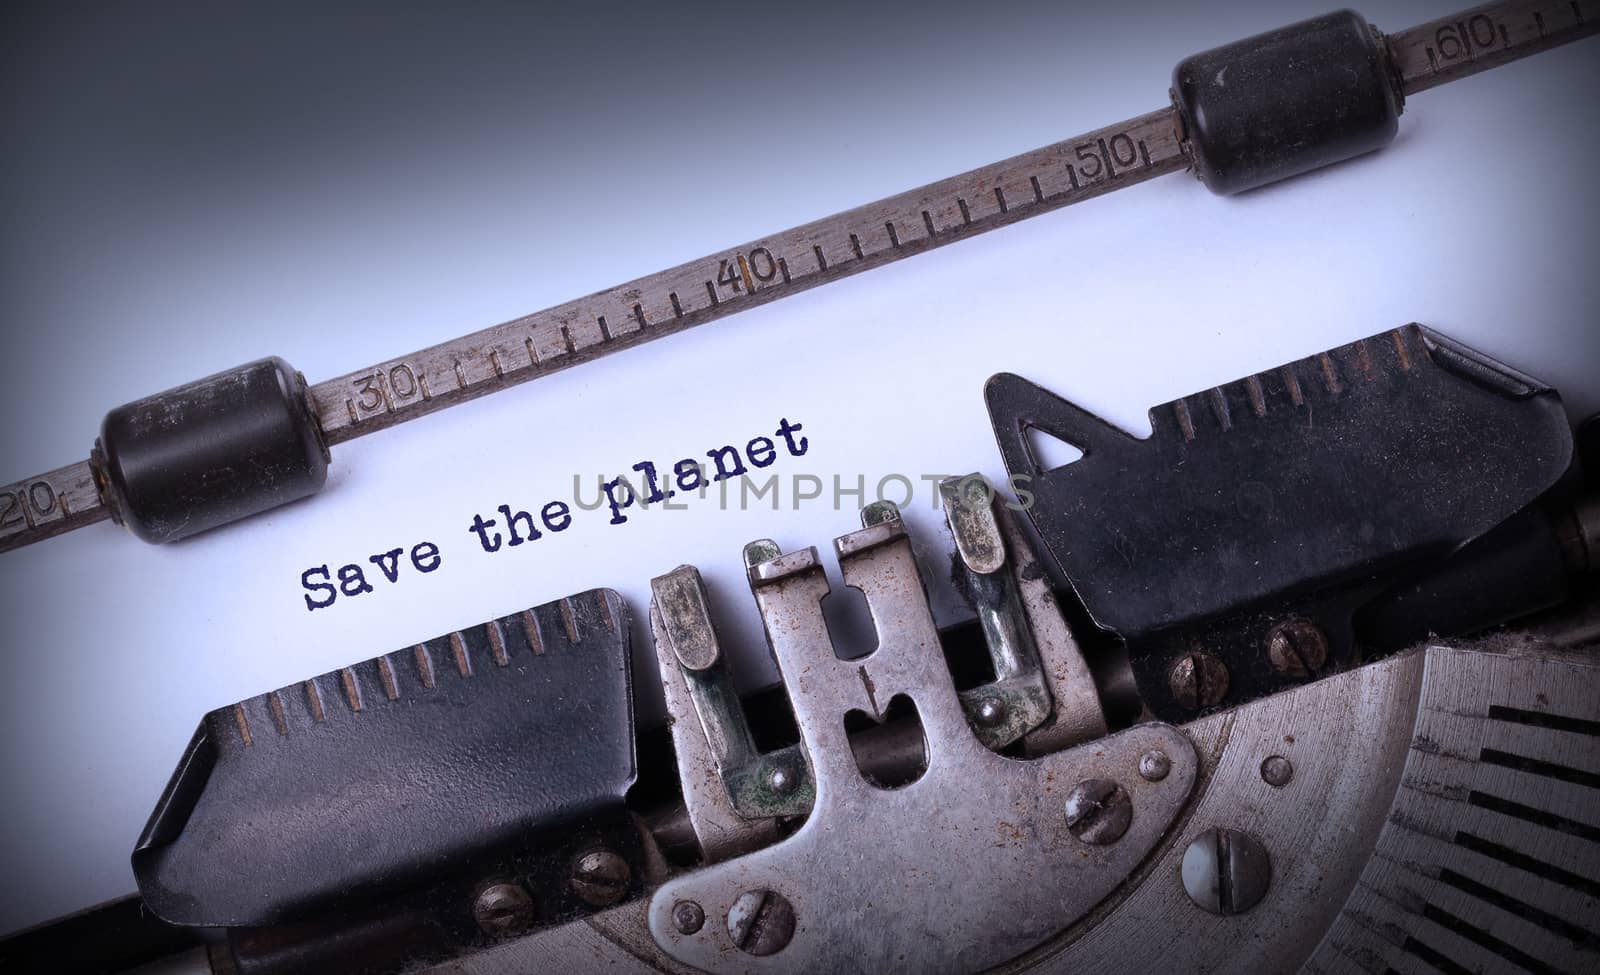 Save the planet, written on an old typewriter by michaklootwijk